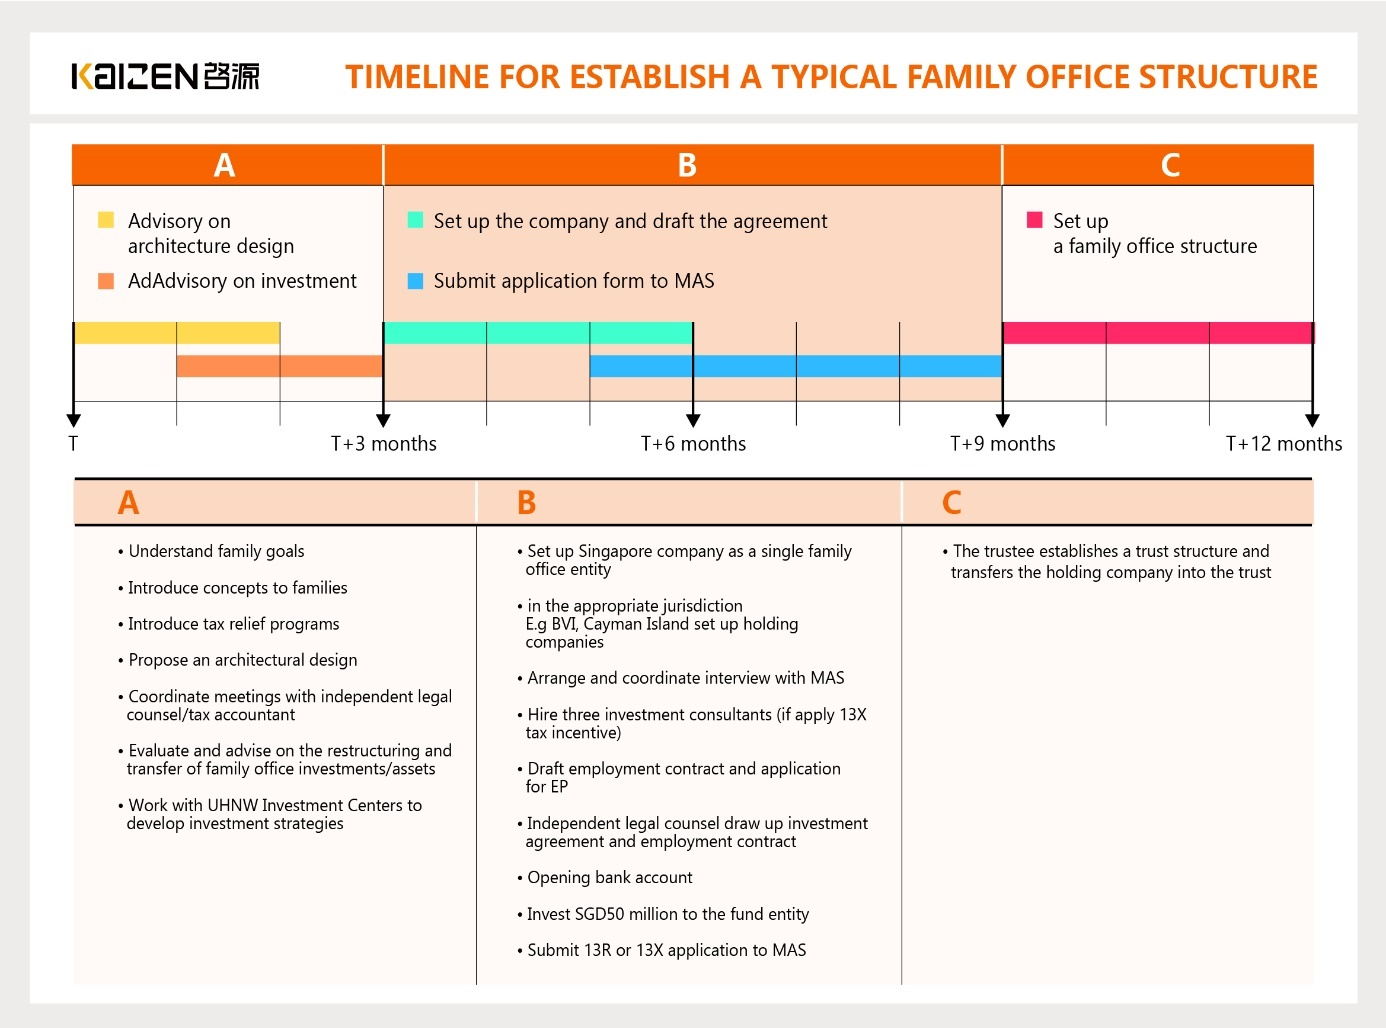 How Long Will it Take to Set Up a Single Family Office